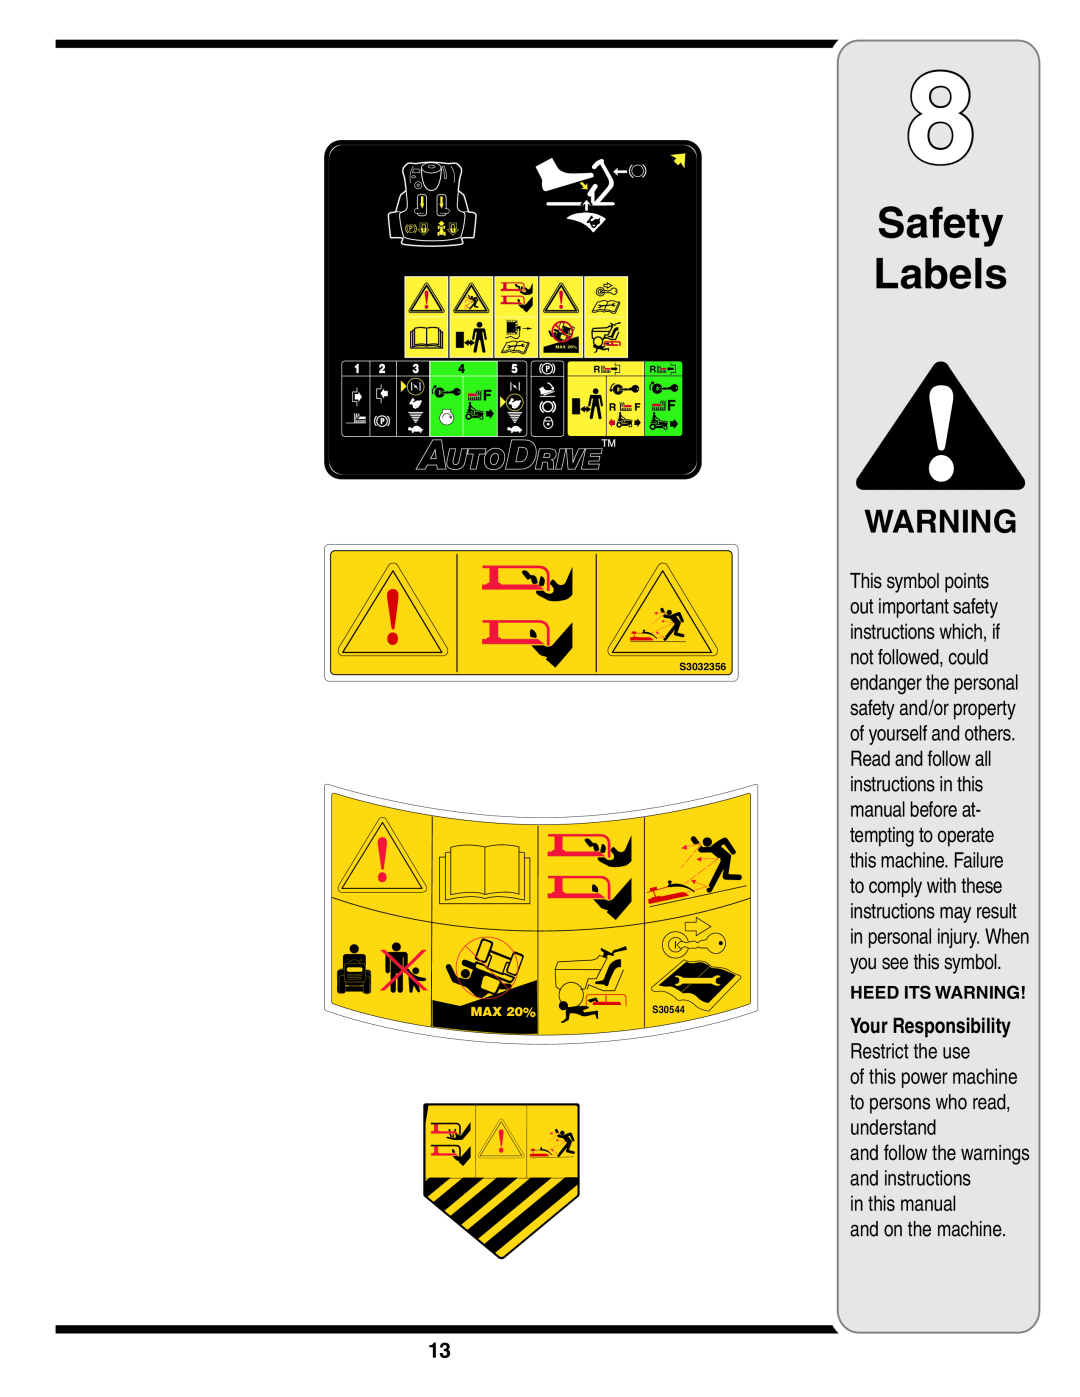 White Outdoor 606 Safety Labels, in this manual and on the machine, HEED ITS WARNING Your Responsibility Restrict the use 